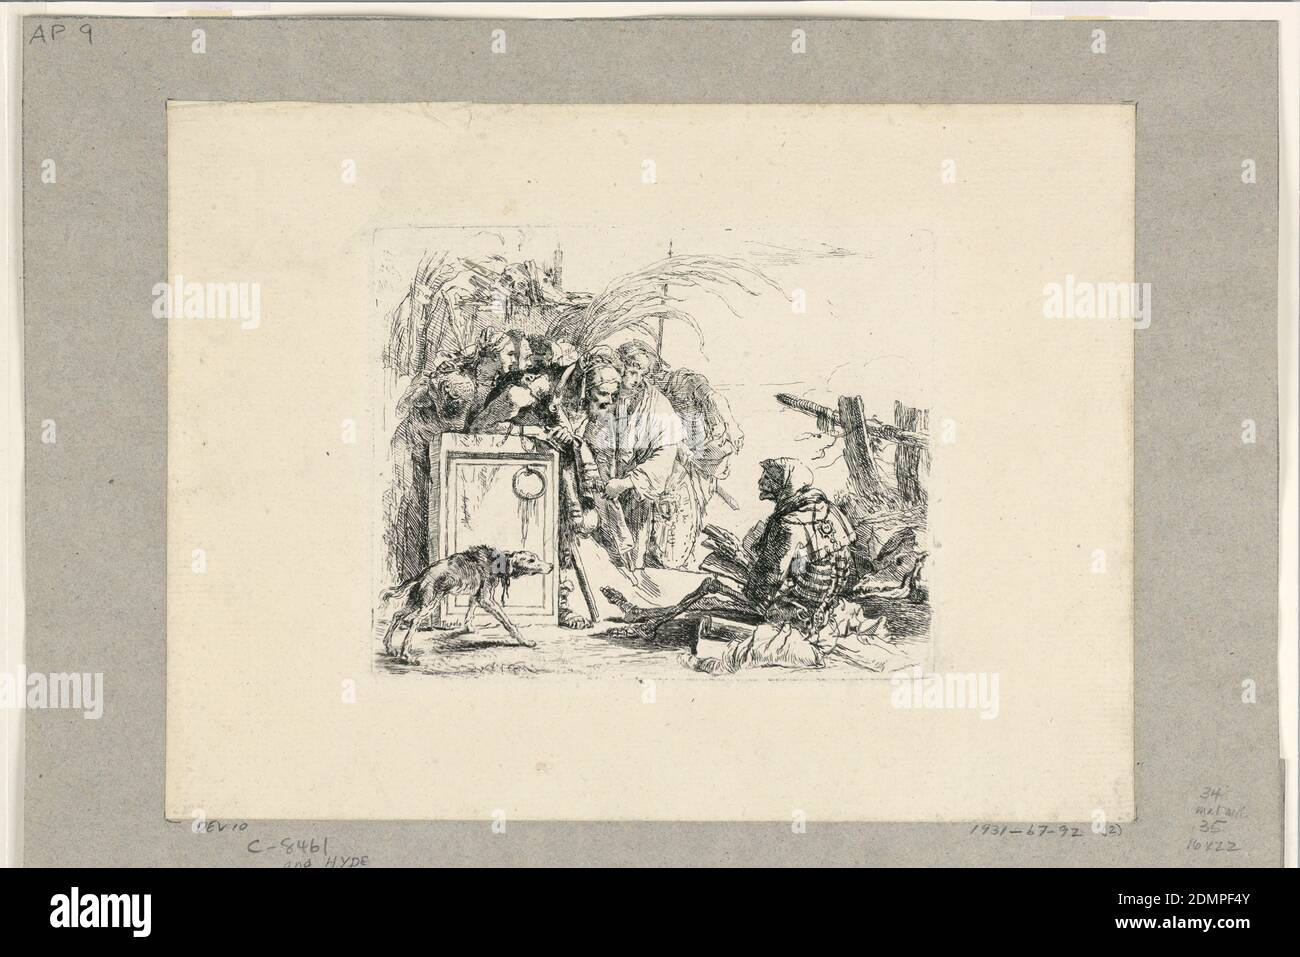 Death Giving Audience, from the Vari Capricci, Giovanni Battista Tiepolo, Italian, 1692 - 1770, Etching on laid paper, Second state, Italy, 1750–1760, Print Stock Photo